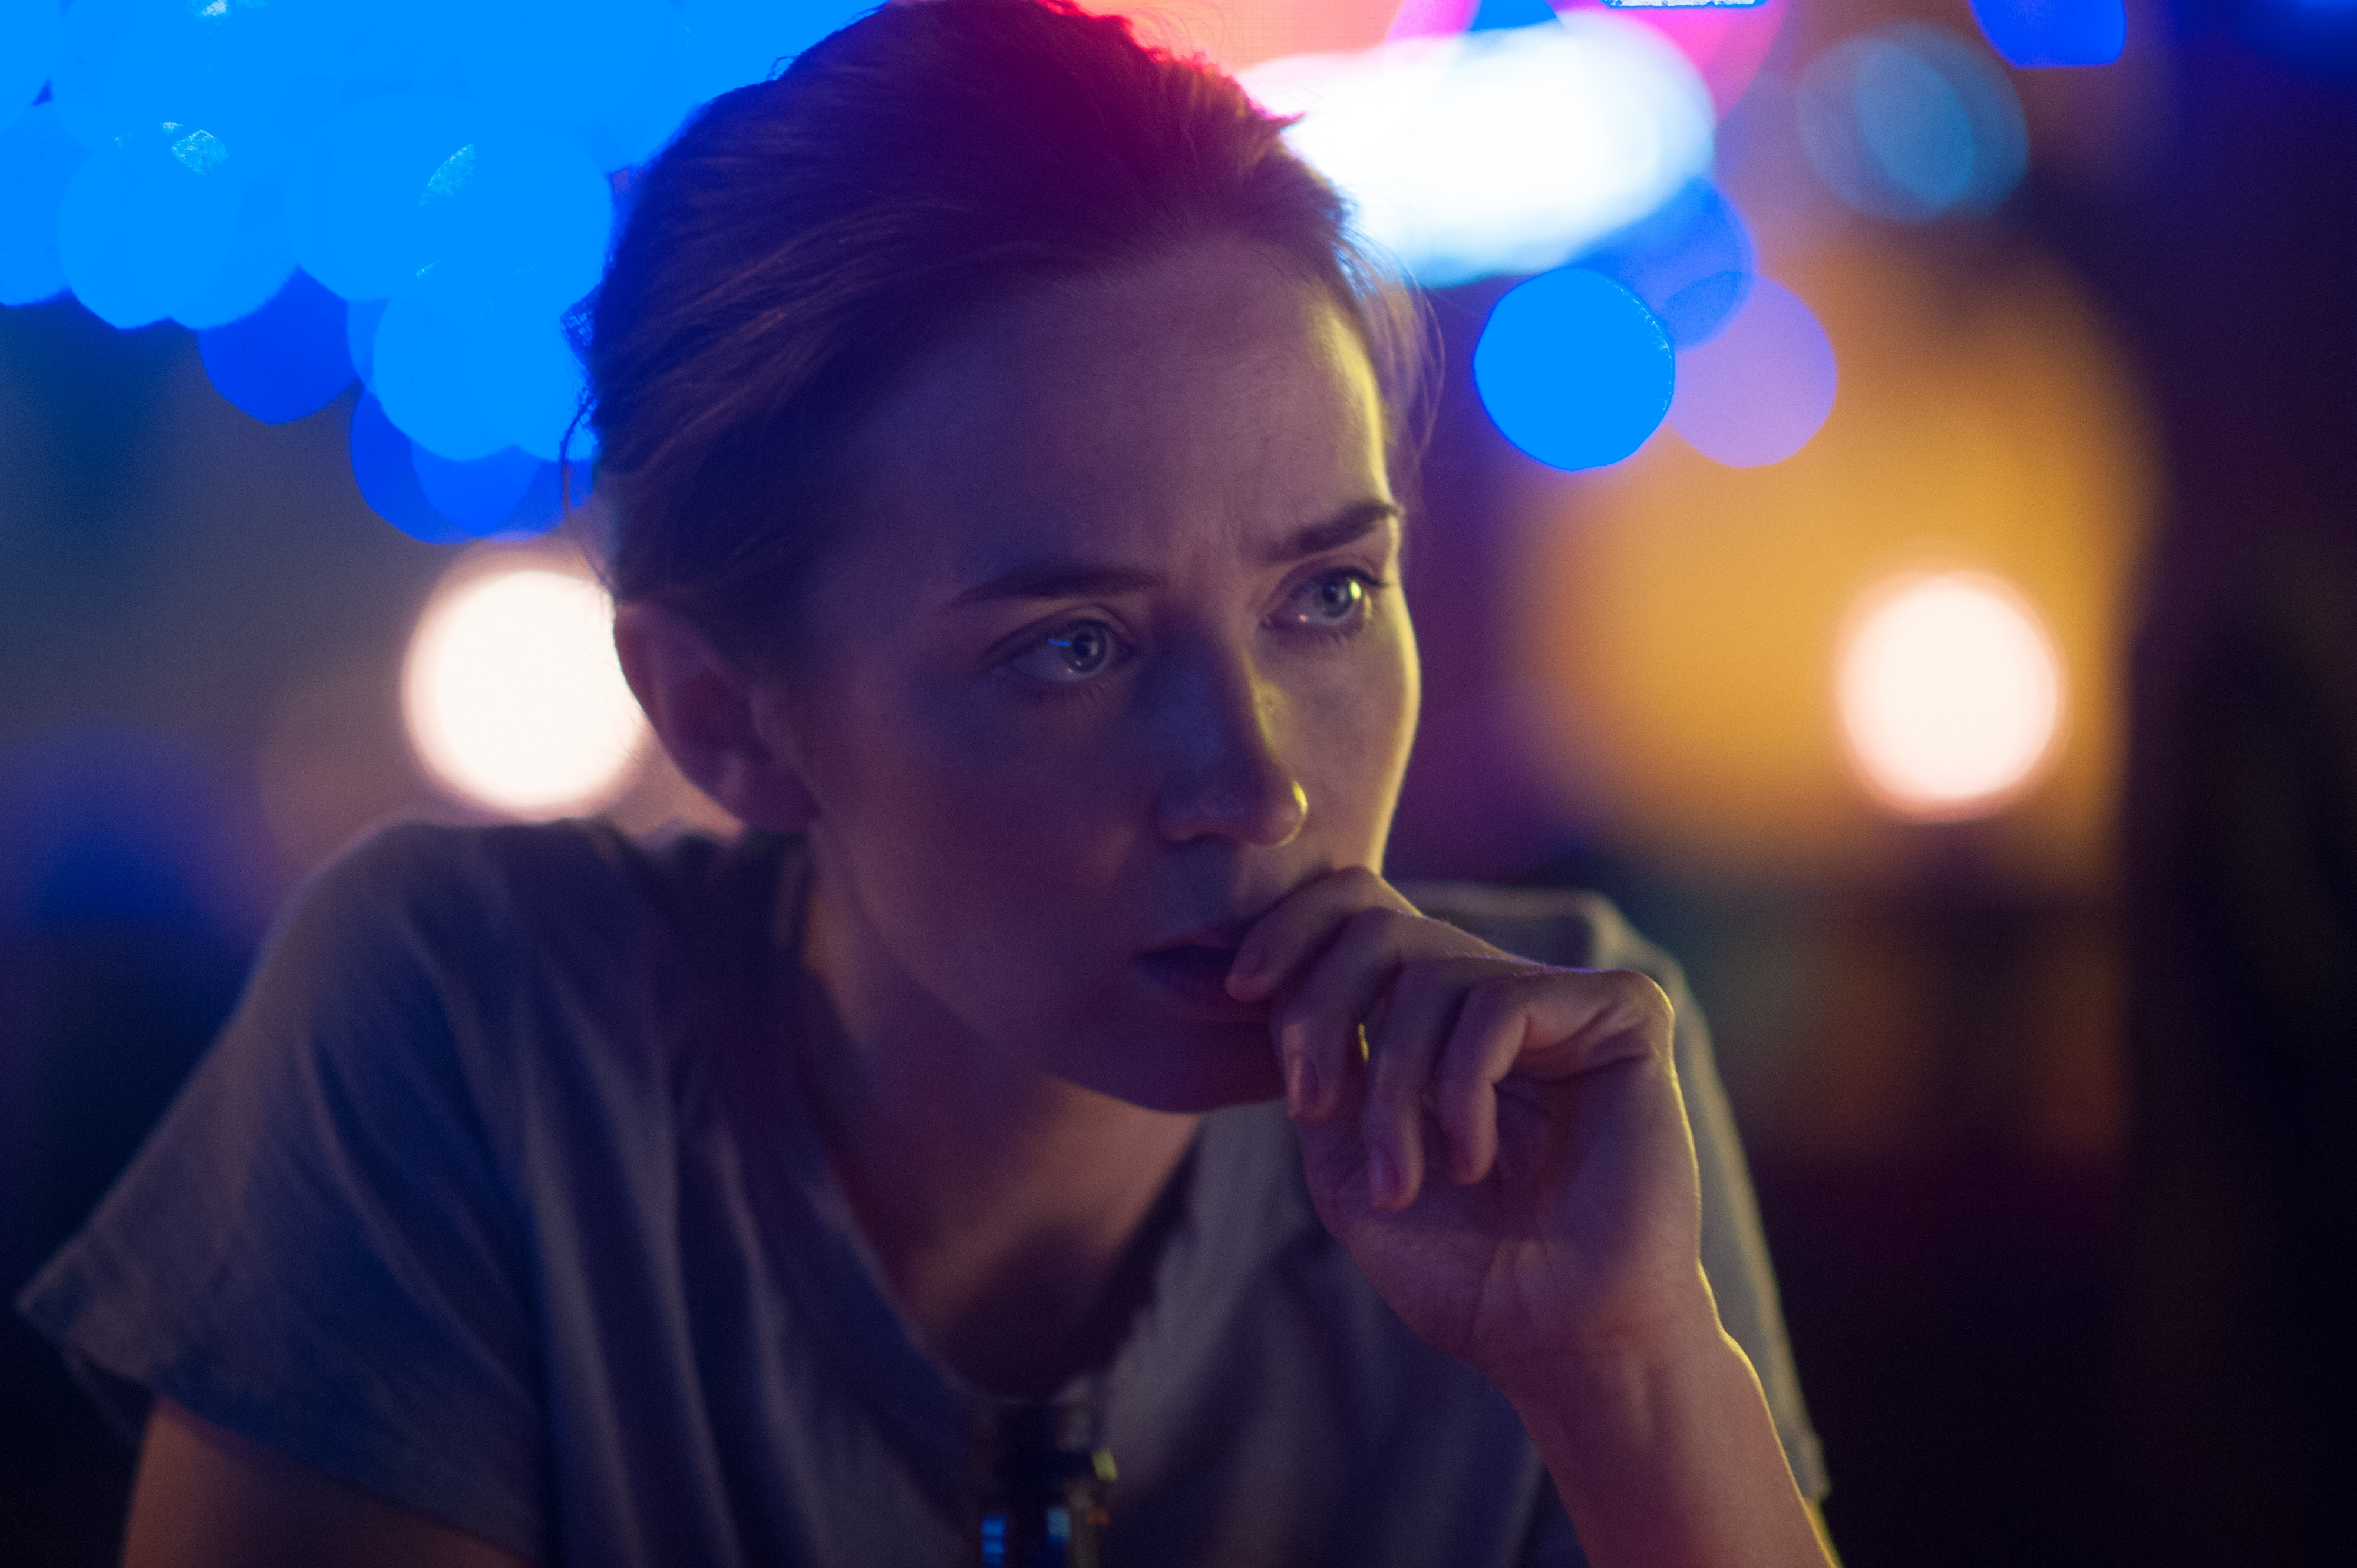 #actress, #celebrity, #face, #emily Blunt, #sicario, - 시카 리오 에밀리 블런트 , HD Wallpaper & Backgrounds